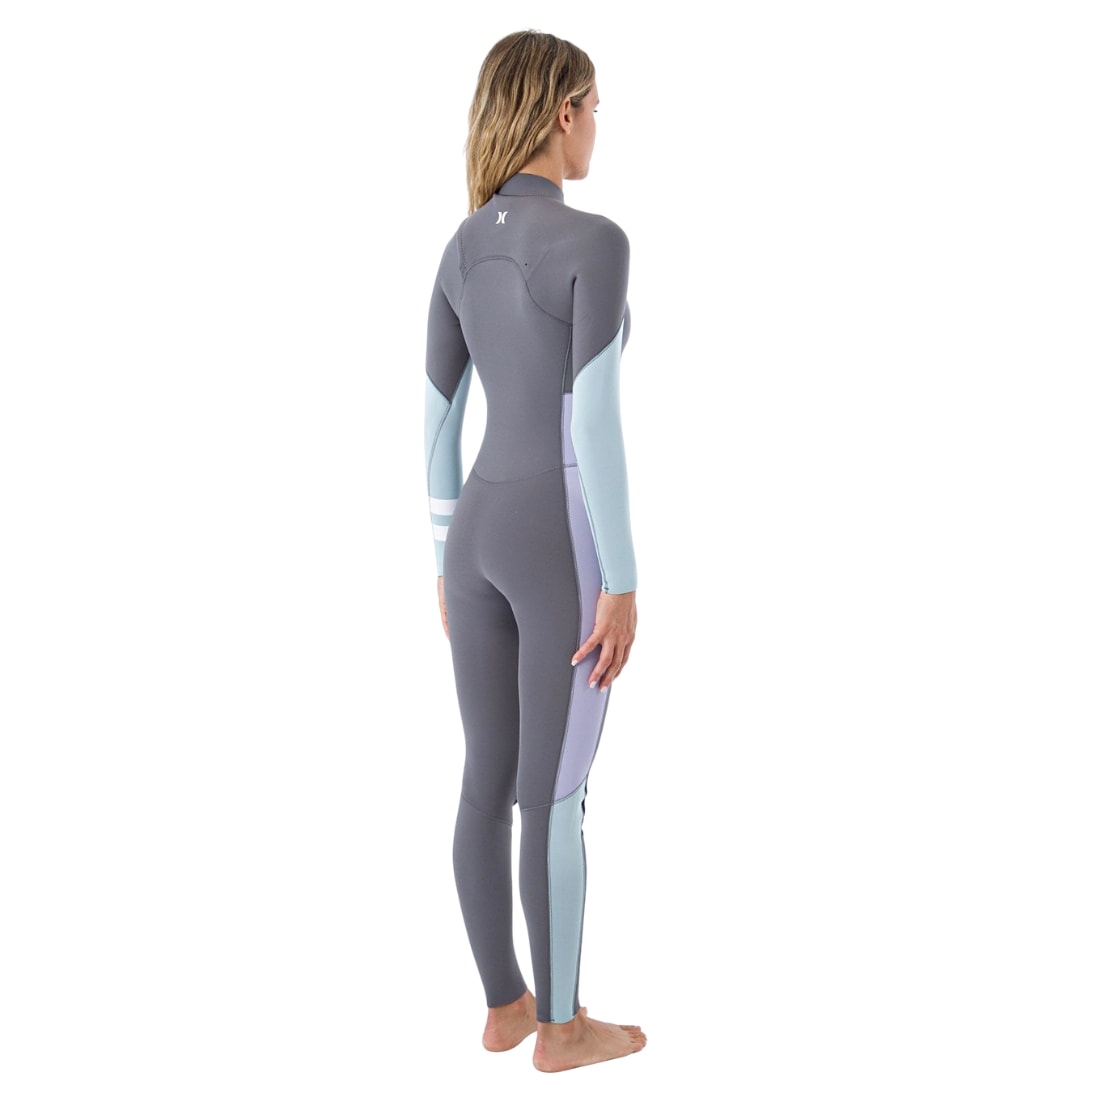 Hurley Womens Advantage 3/2mm Chest Zip Full Wetsuit - Charcoal Gray